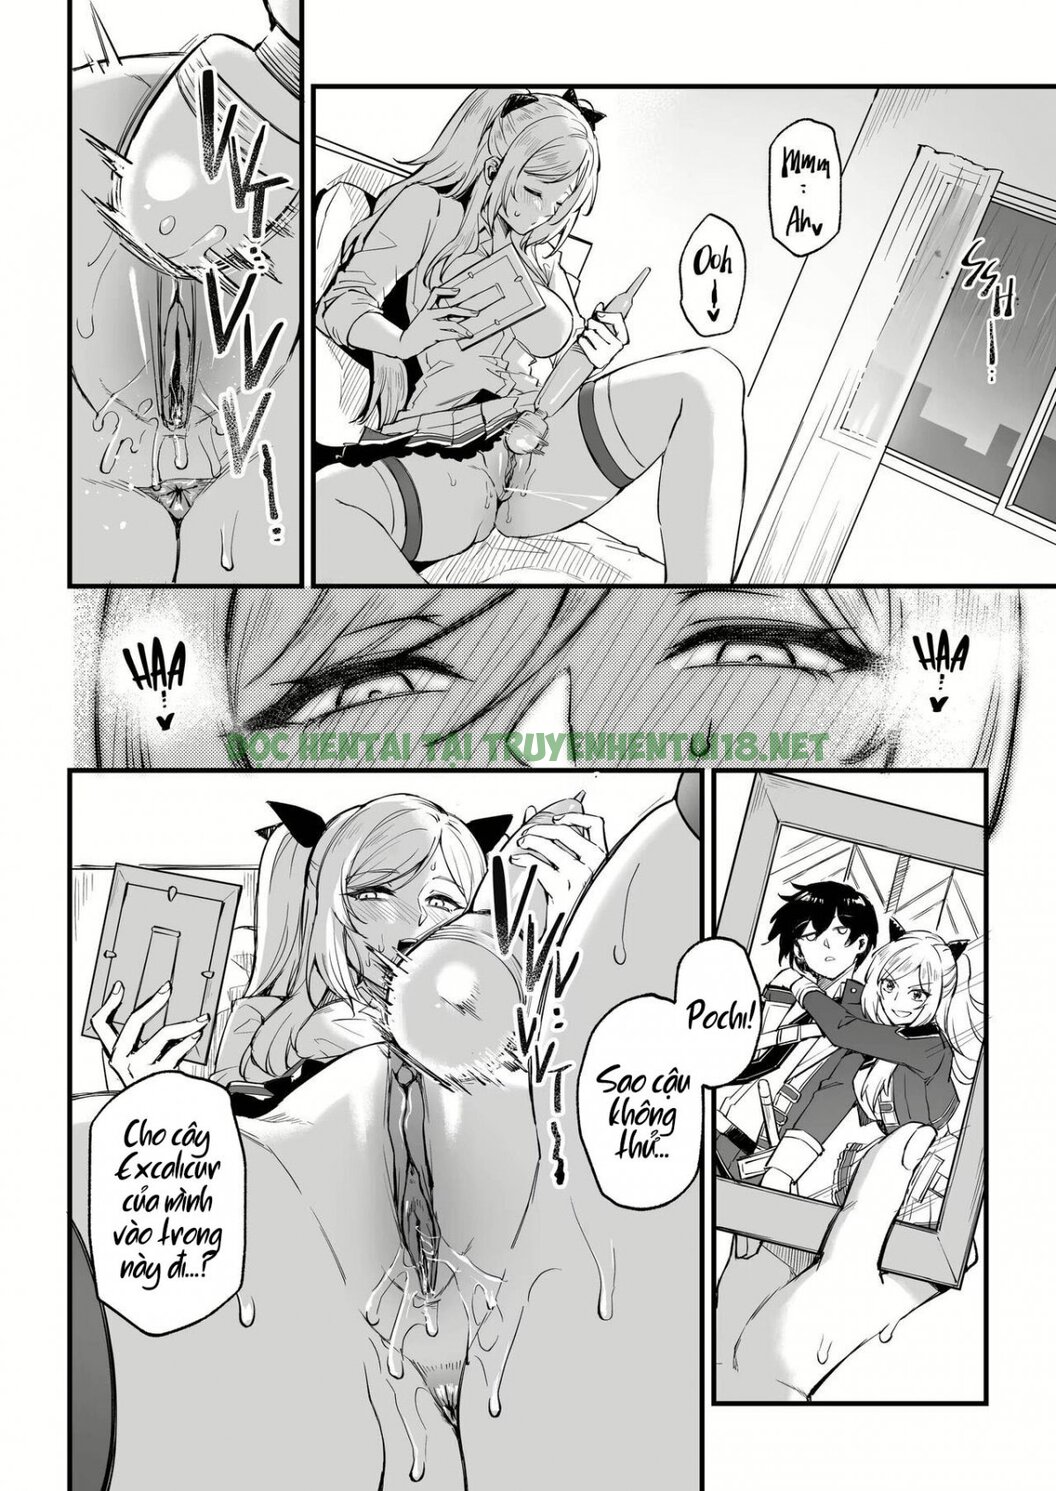 Xem ảnh I NEED MORE POWER! - Chapter 1.5 END - 14 - Hentai24h.Tv